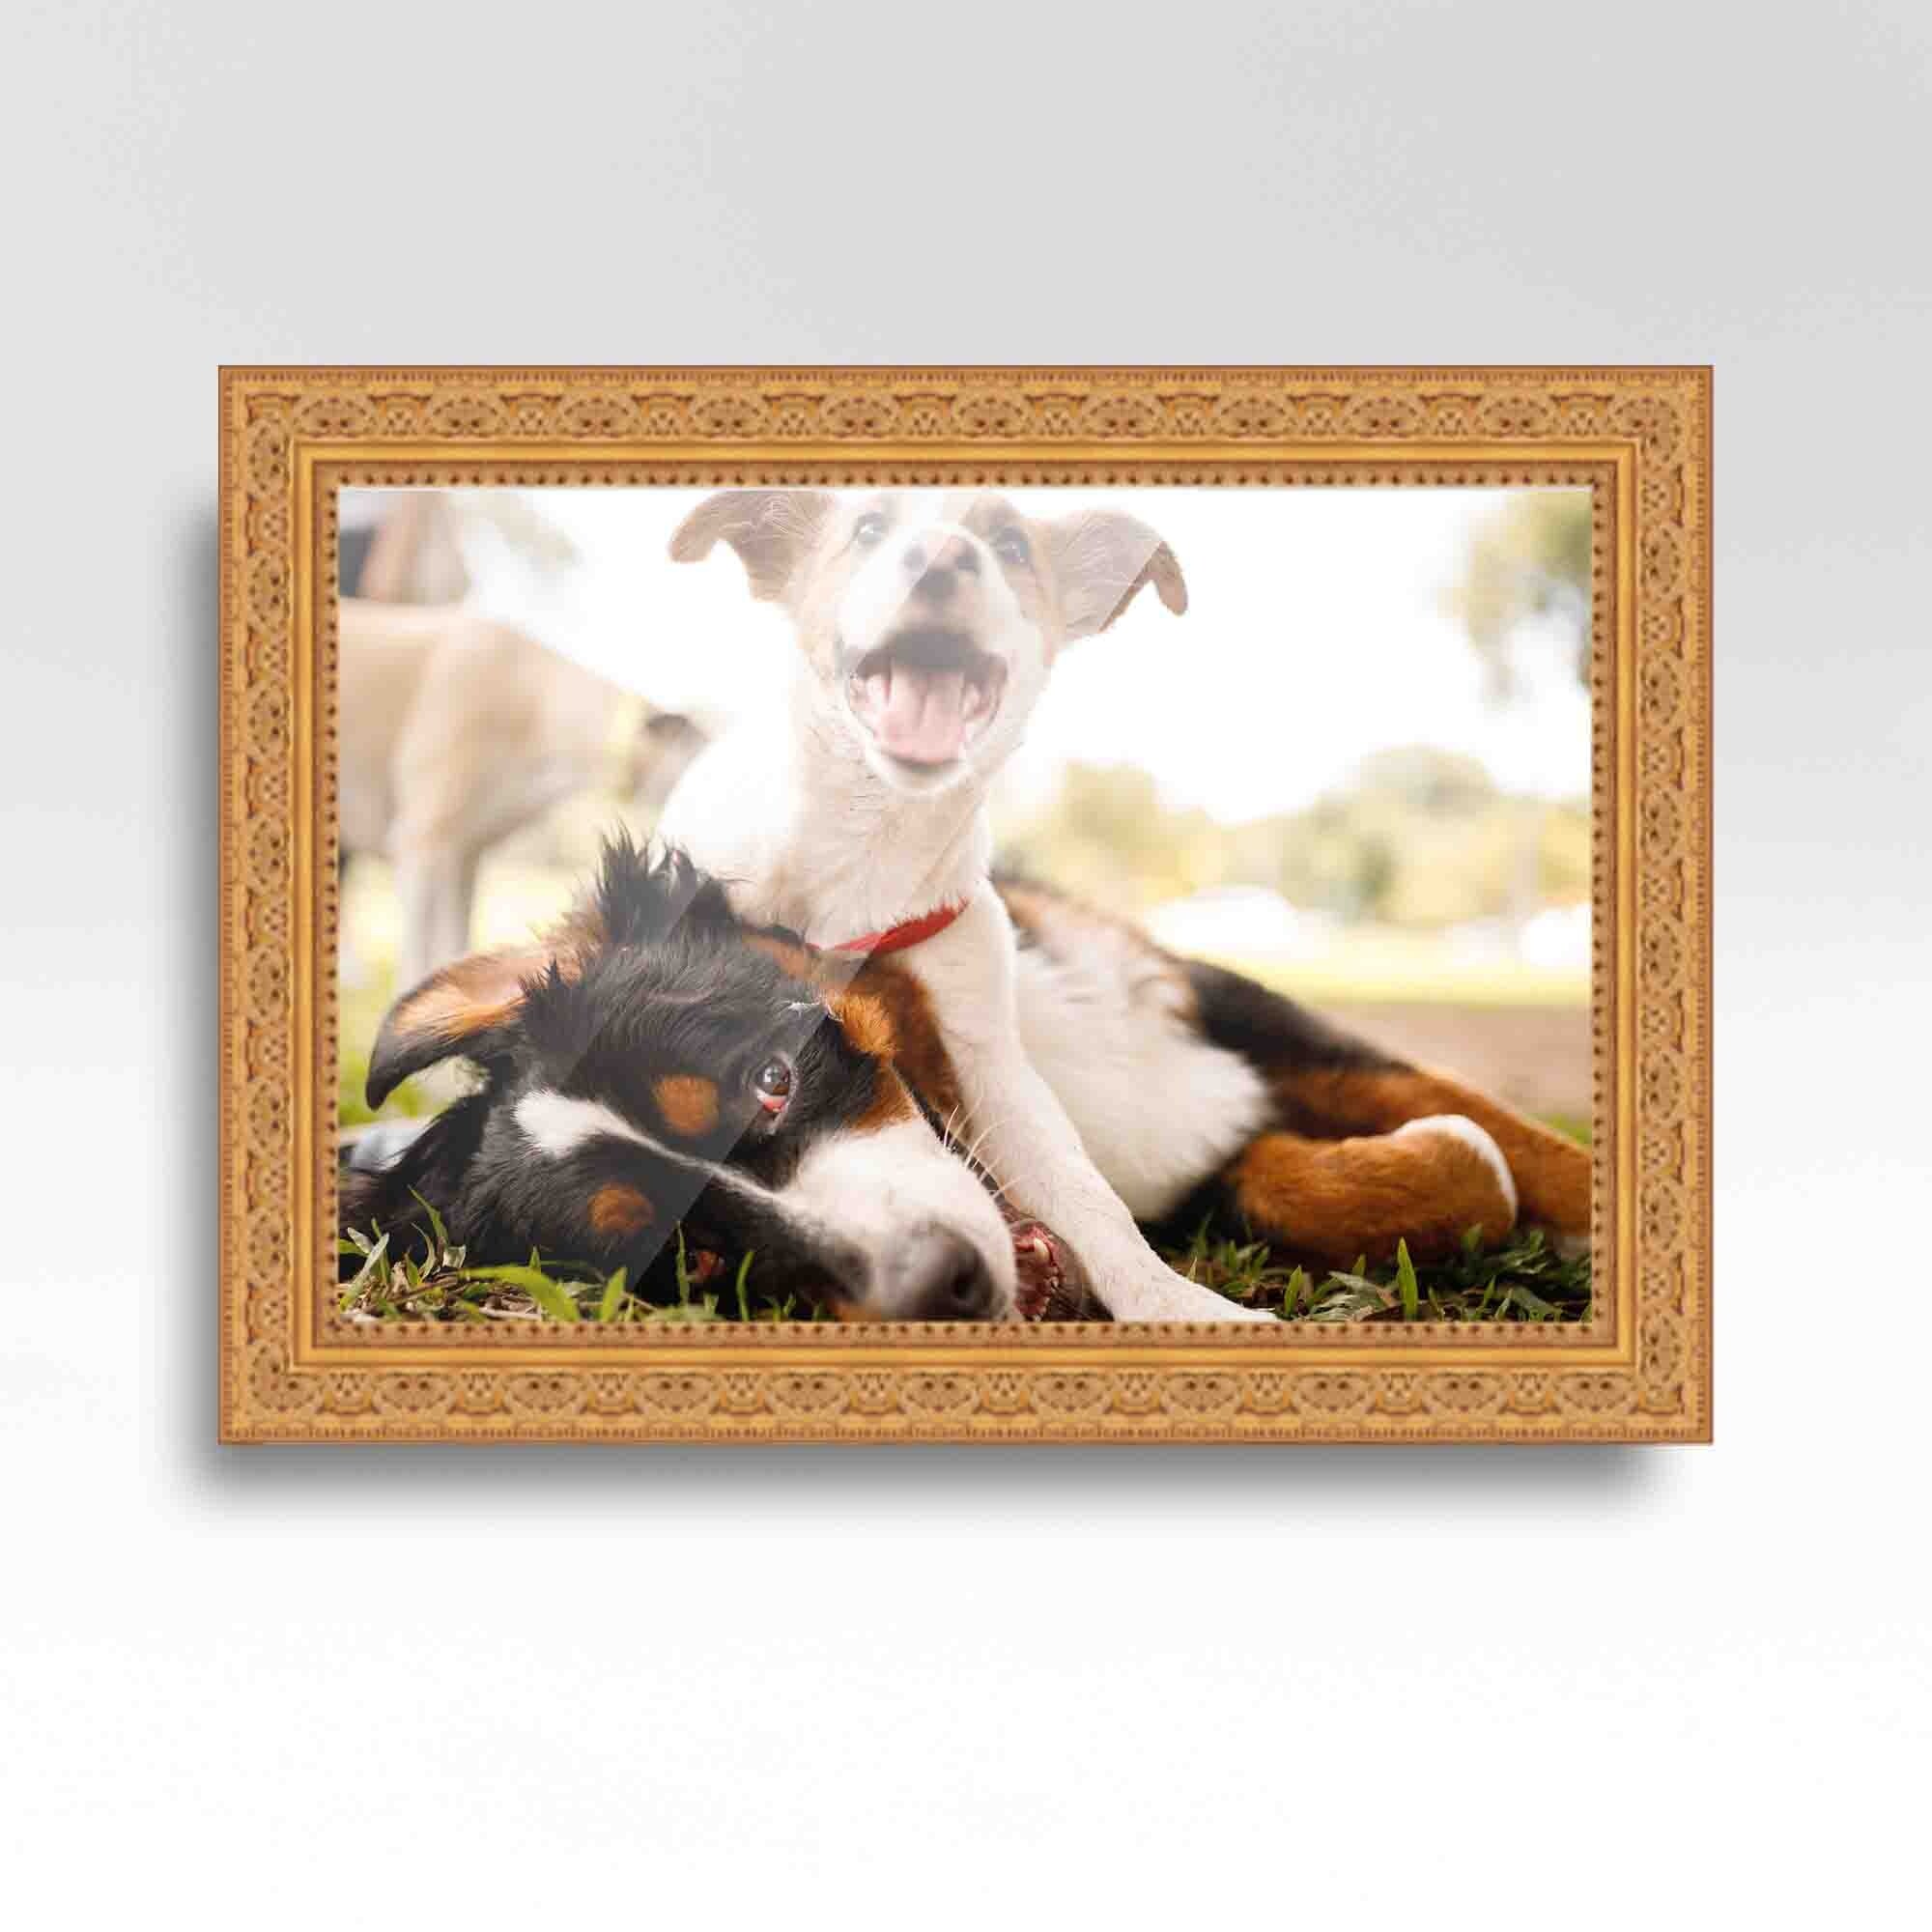 26x34 Frame White Solid Wood Picture Frame Width 3 Inches - Interior Frame Depth 0.5 Inches|White